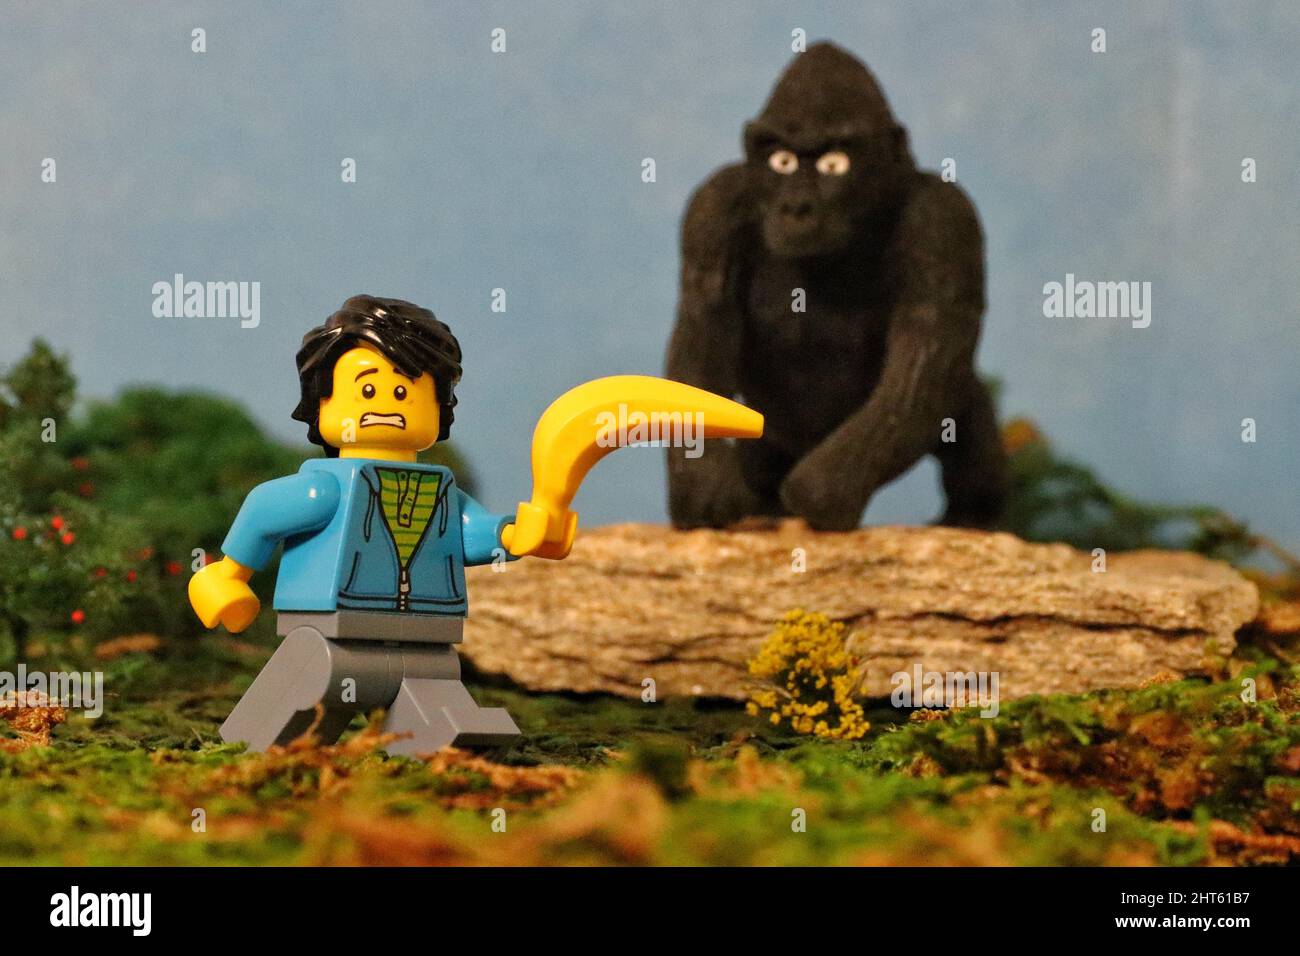 Male Lego figurine in the jungle with an orangutan toy. Stock Photo